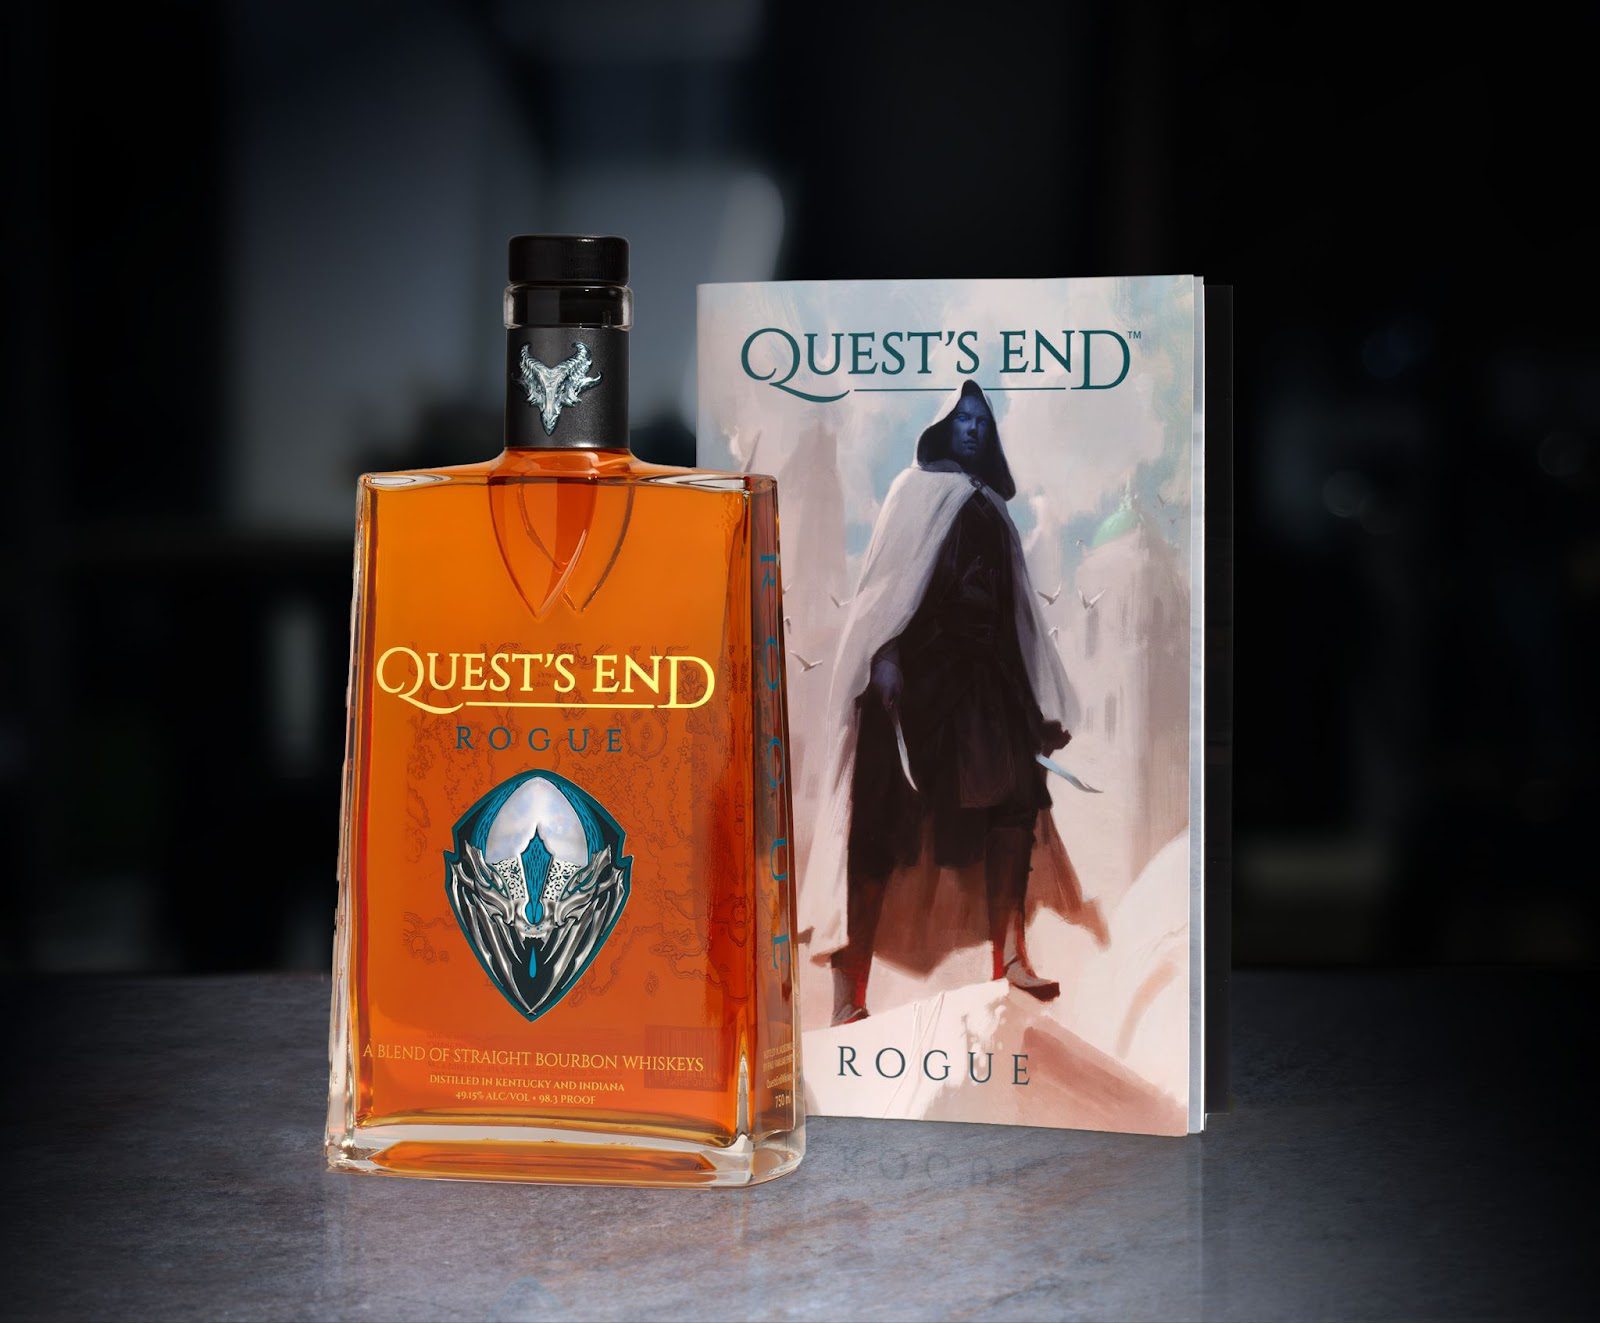 Quest's End: Rogue bottle and book